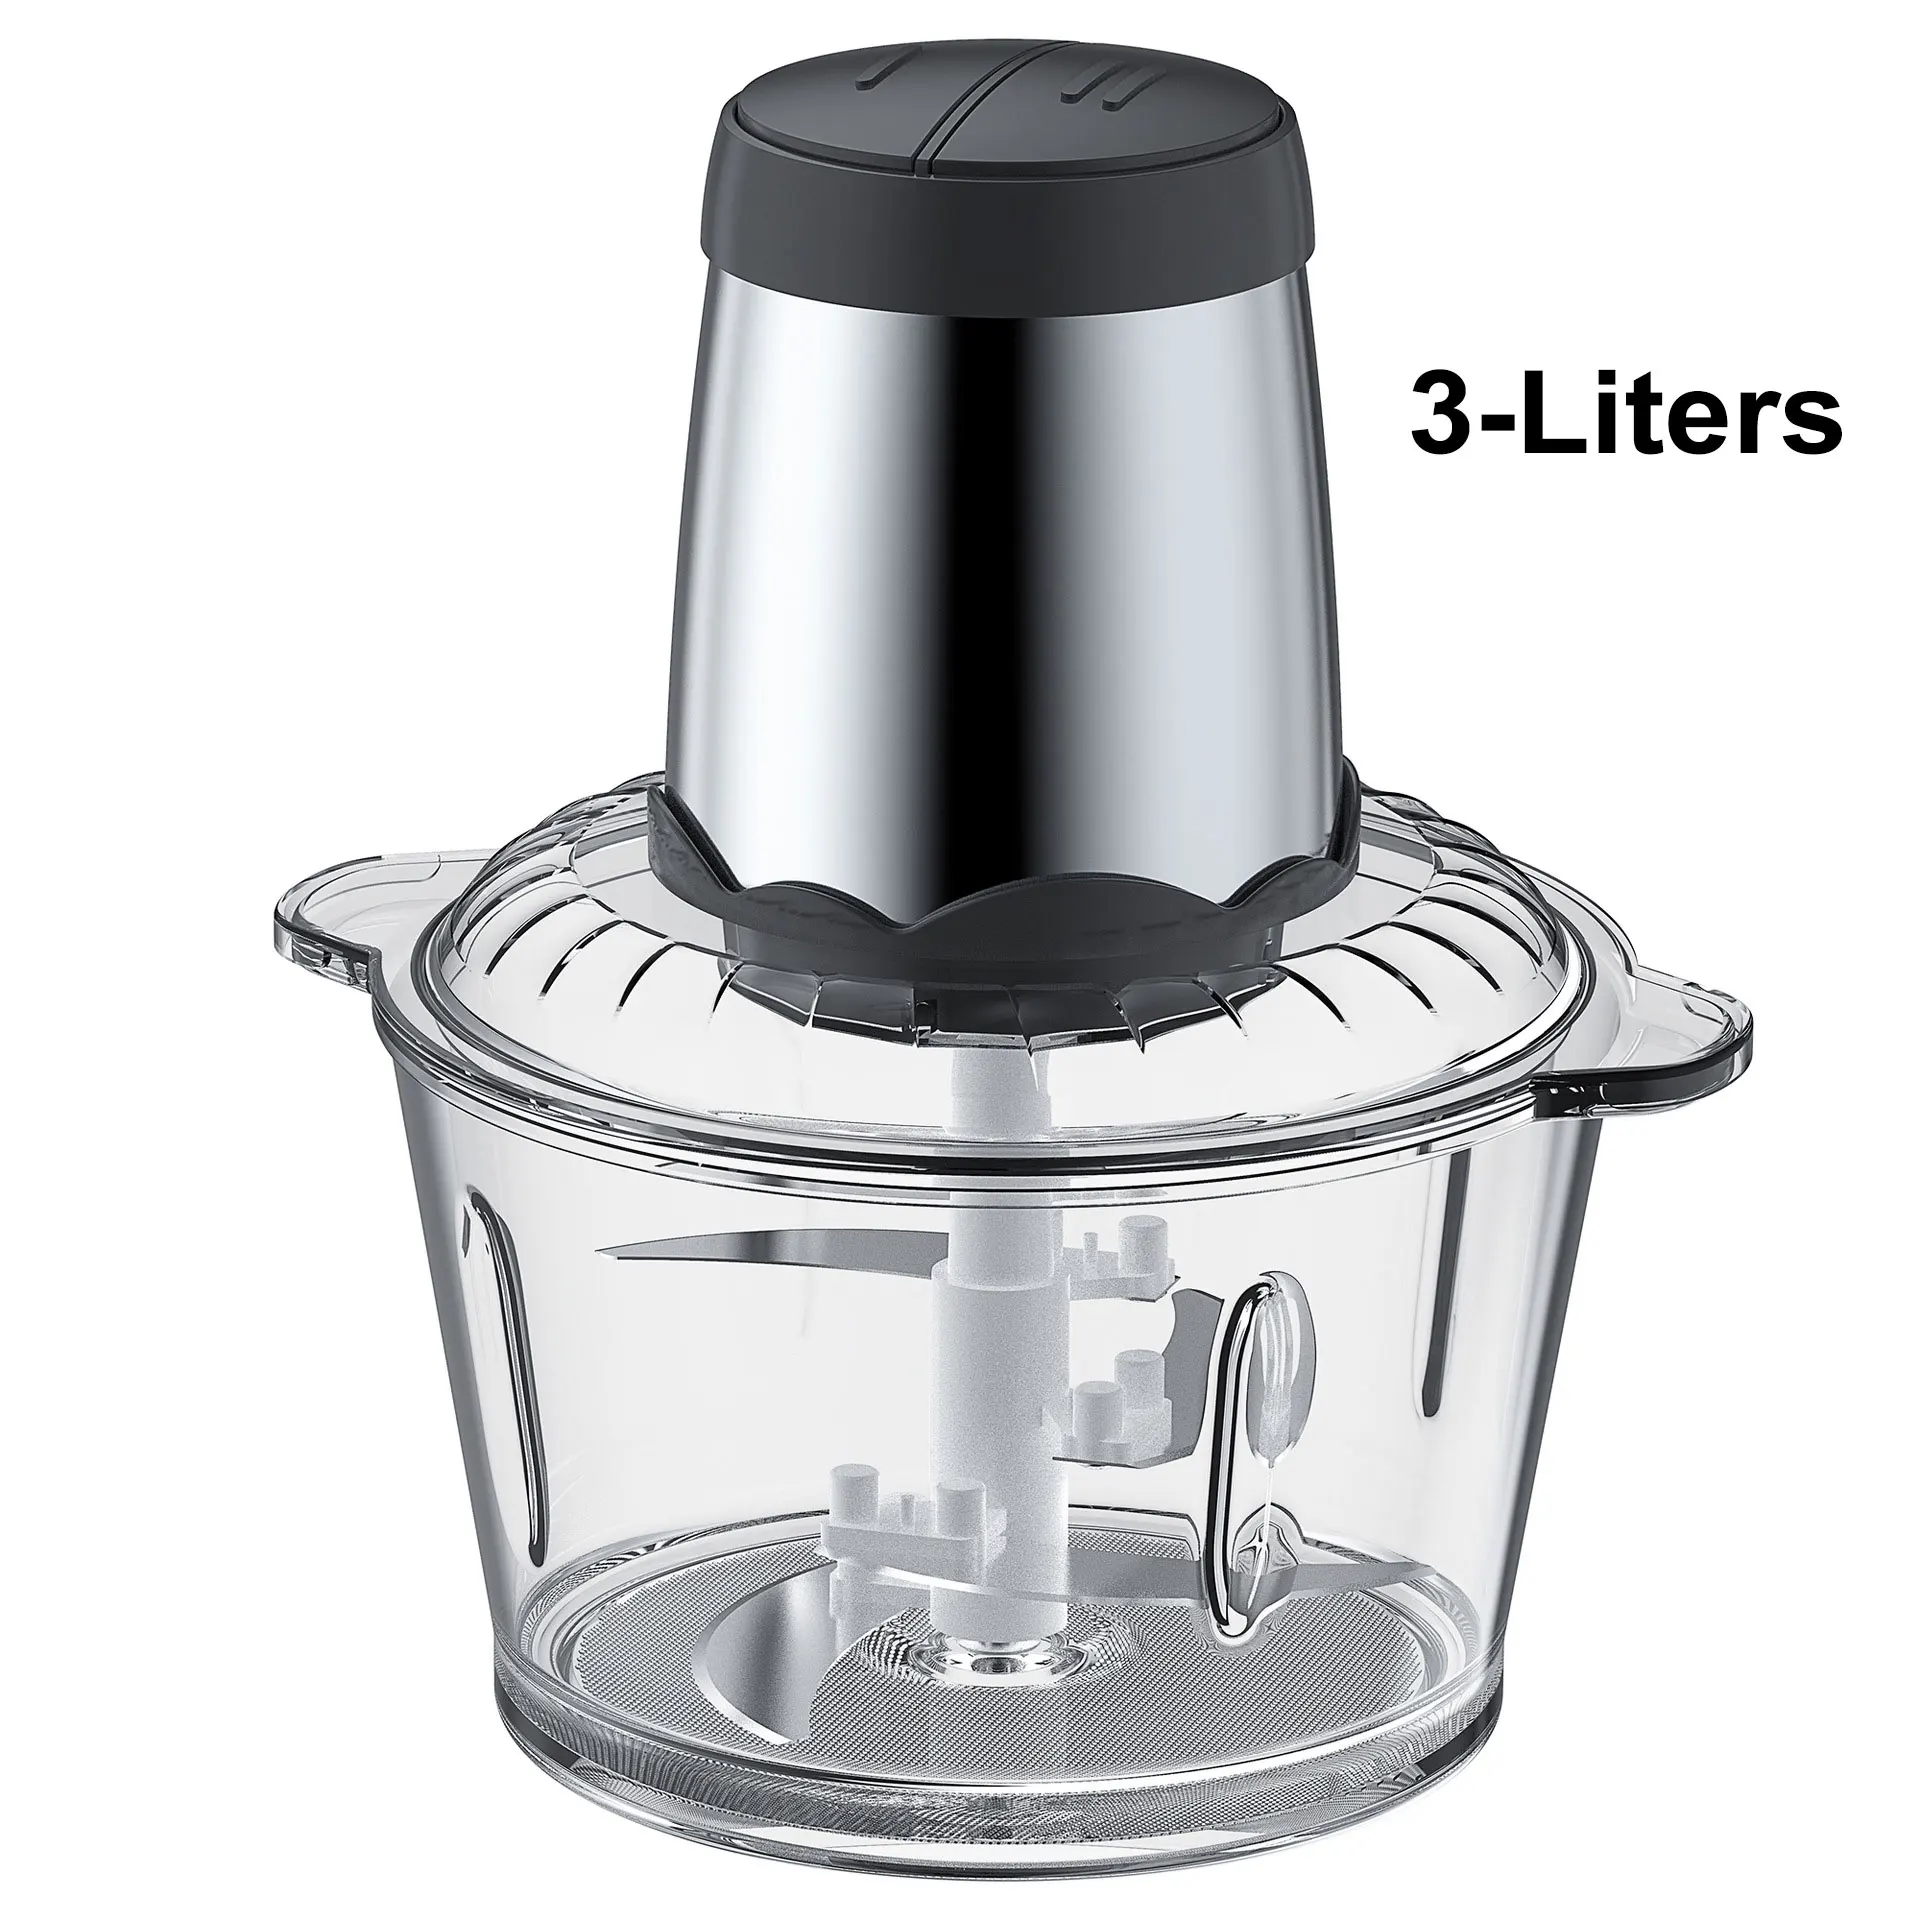 https://ae01.alicdn.com/kf/Sfada61236bd04be497706fa1893ab82fE/Food-Processor-with-2-Bowls-Electric-Meat-Chopper-Vegetable-Grinder-Stainless-Steel-Bowl-and-Glass-Bowl.jpg